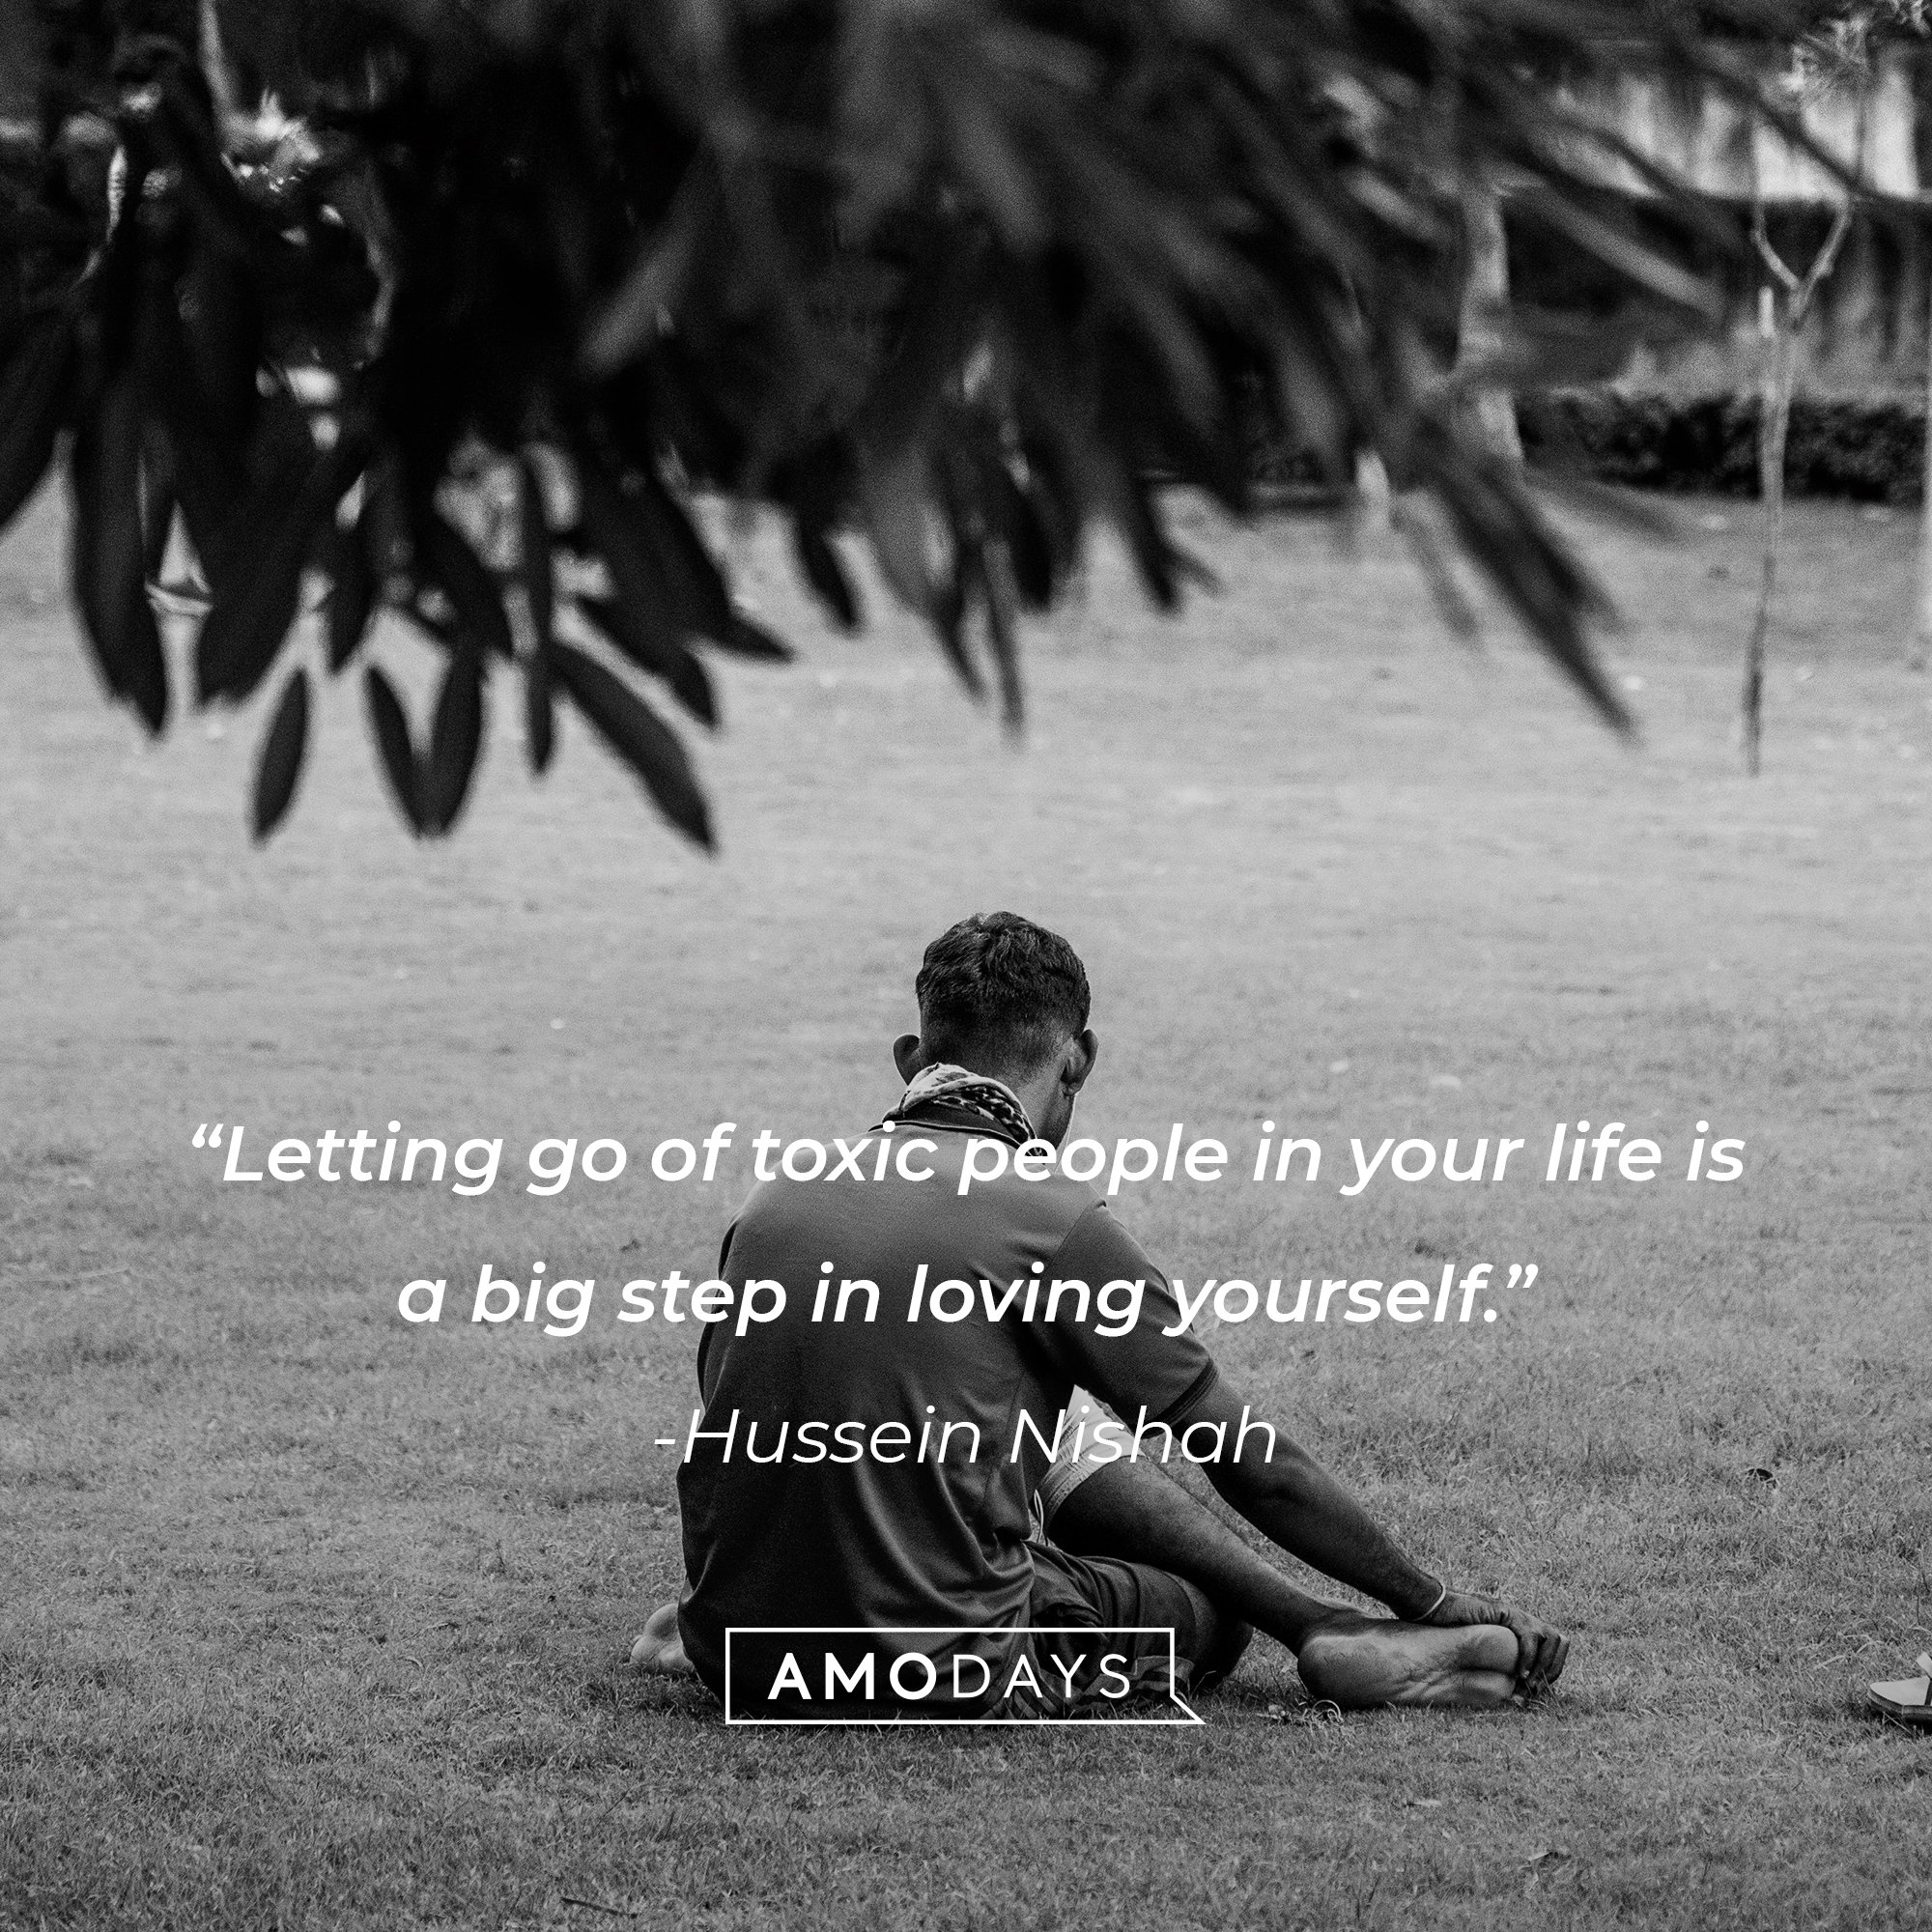  Hussein Nishah’s quote: "Letting go of toxic people in your life is a big step in loving yourself. | Image: AmoDays 